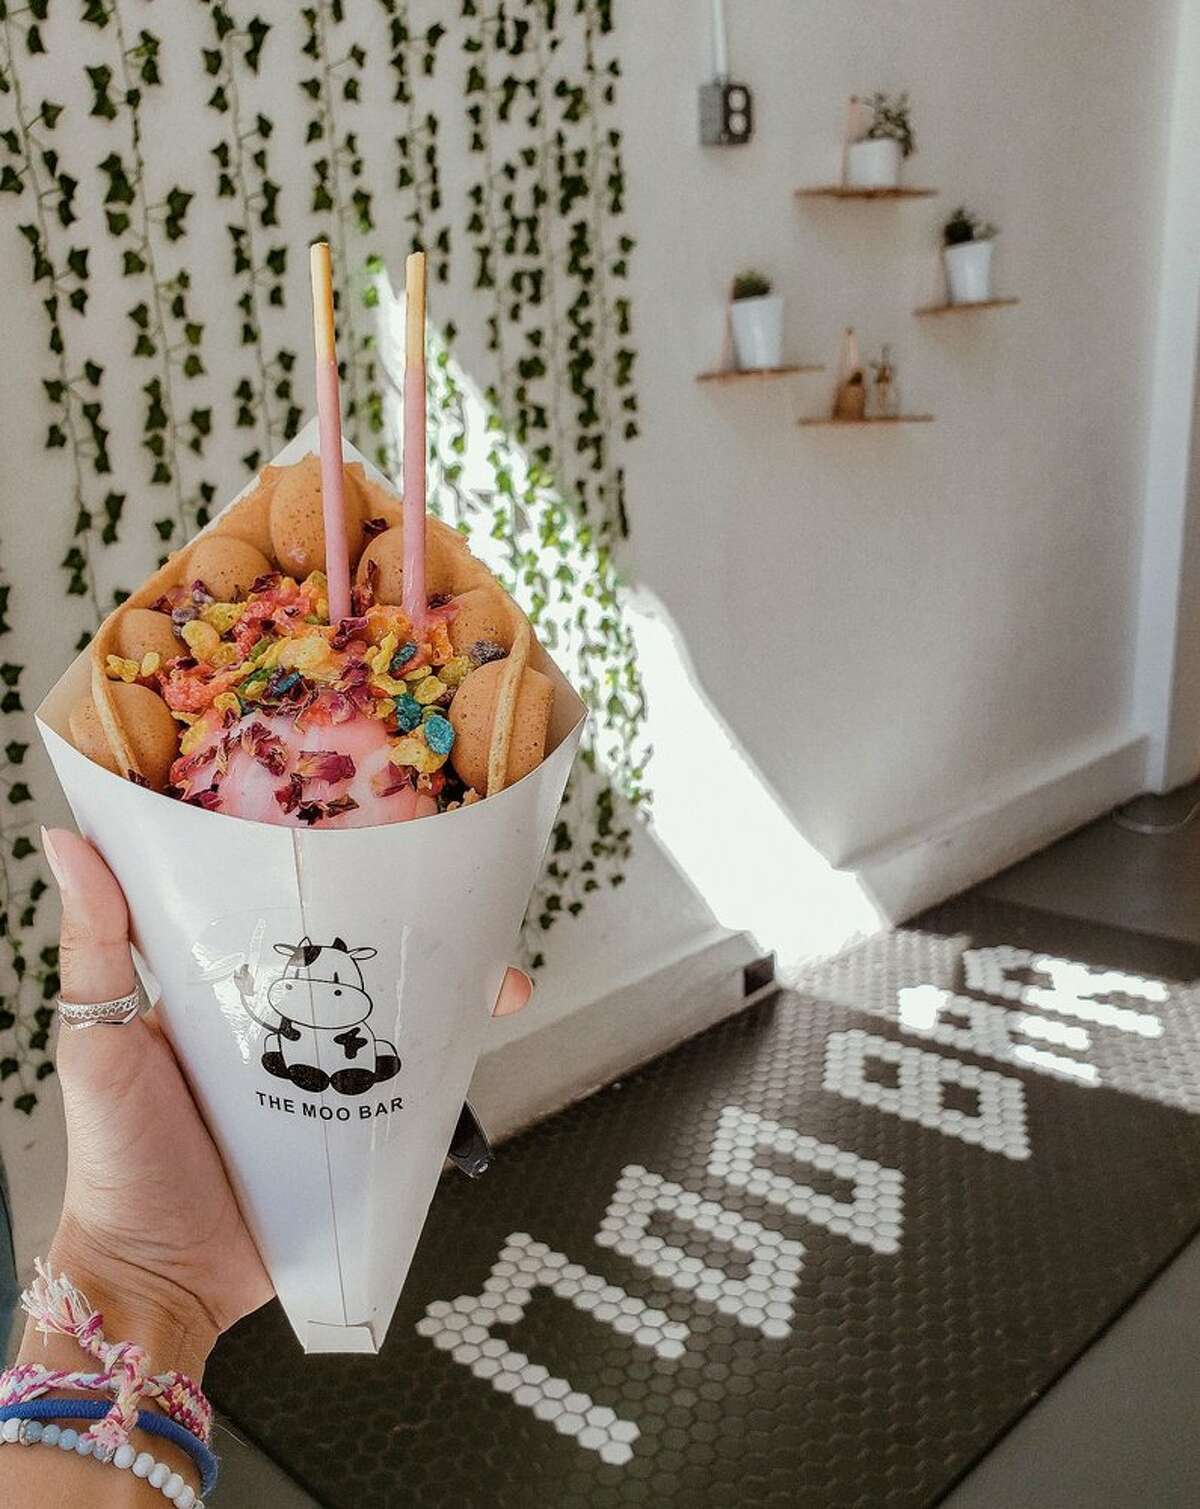 Bubble Waffles, The Moo Bar: Tucked along Westlake Avenue lies this photogenic dime. The shop specializes in boba, but deserves a nod for its puffed waffle cones showered in fruity sweets and snacks.